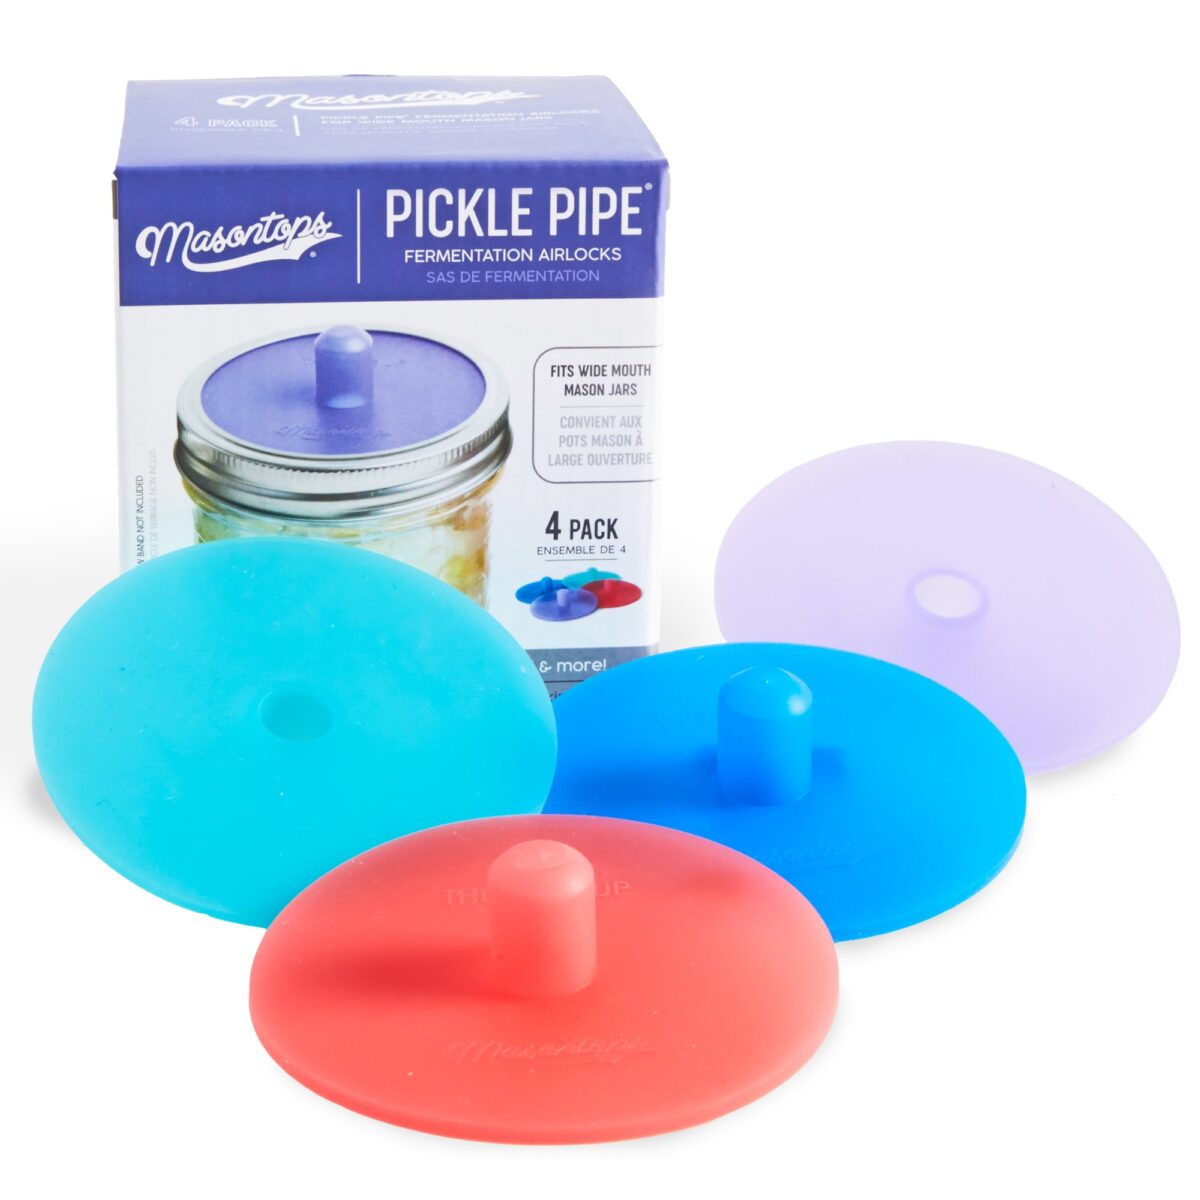 Silicone Pickle Pipes For Home Fermenting-Set of 4 in Bright Colors